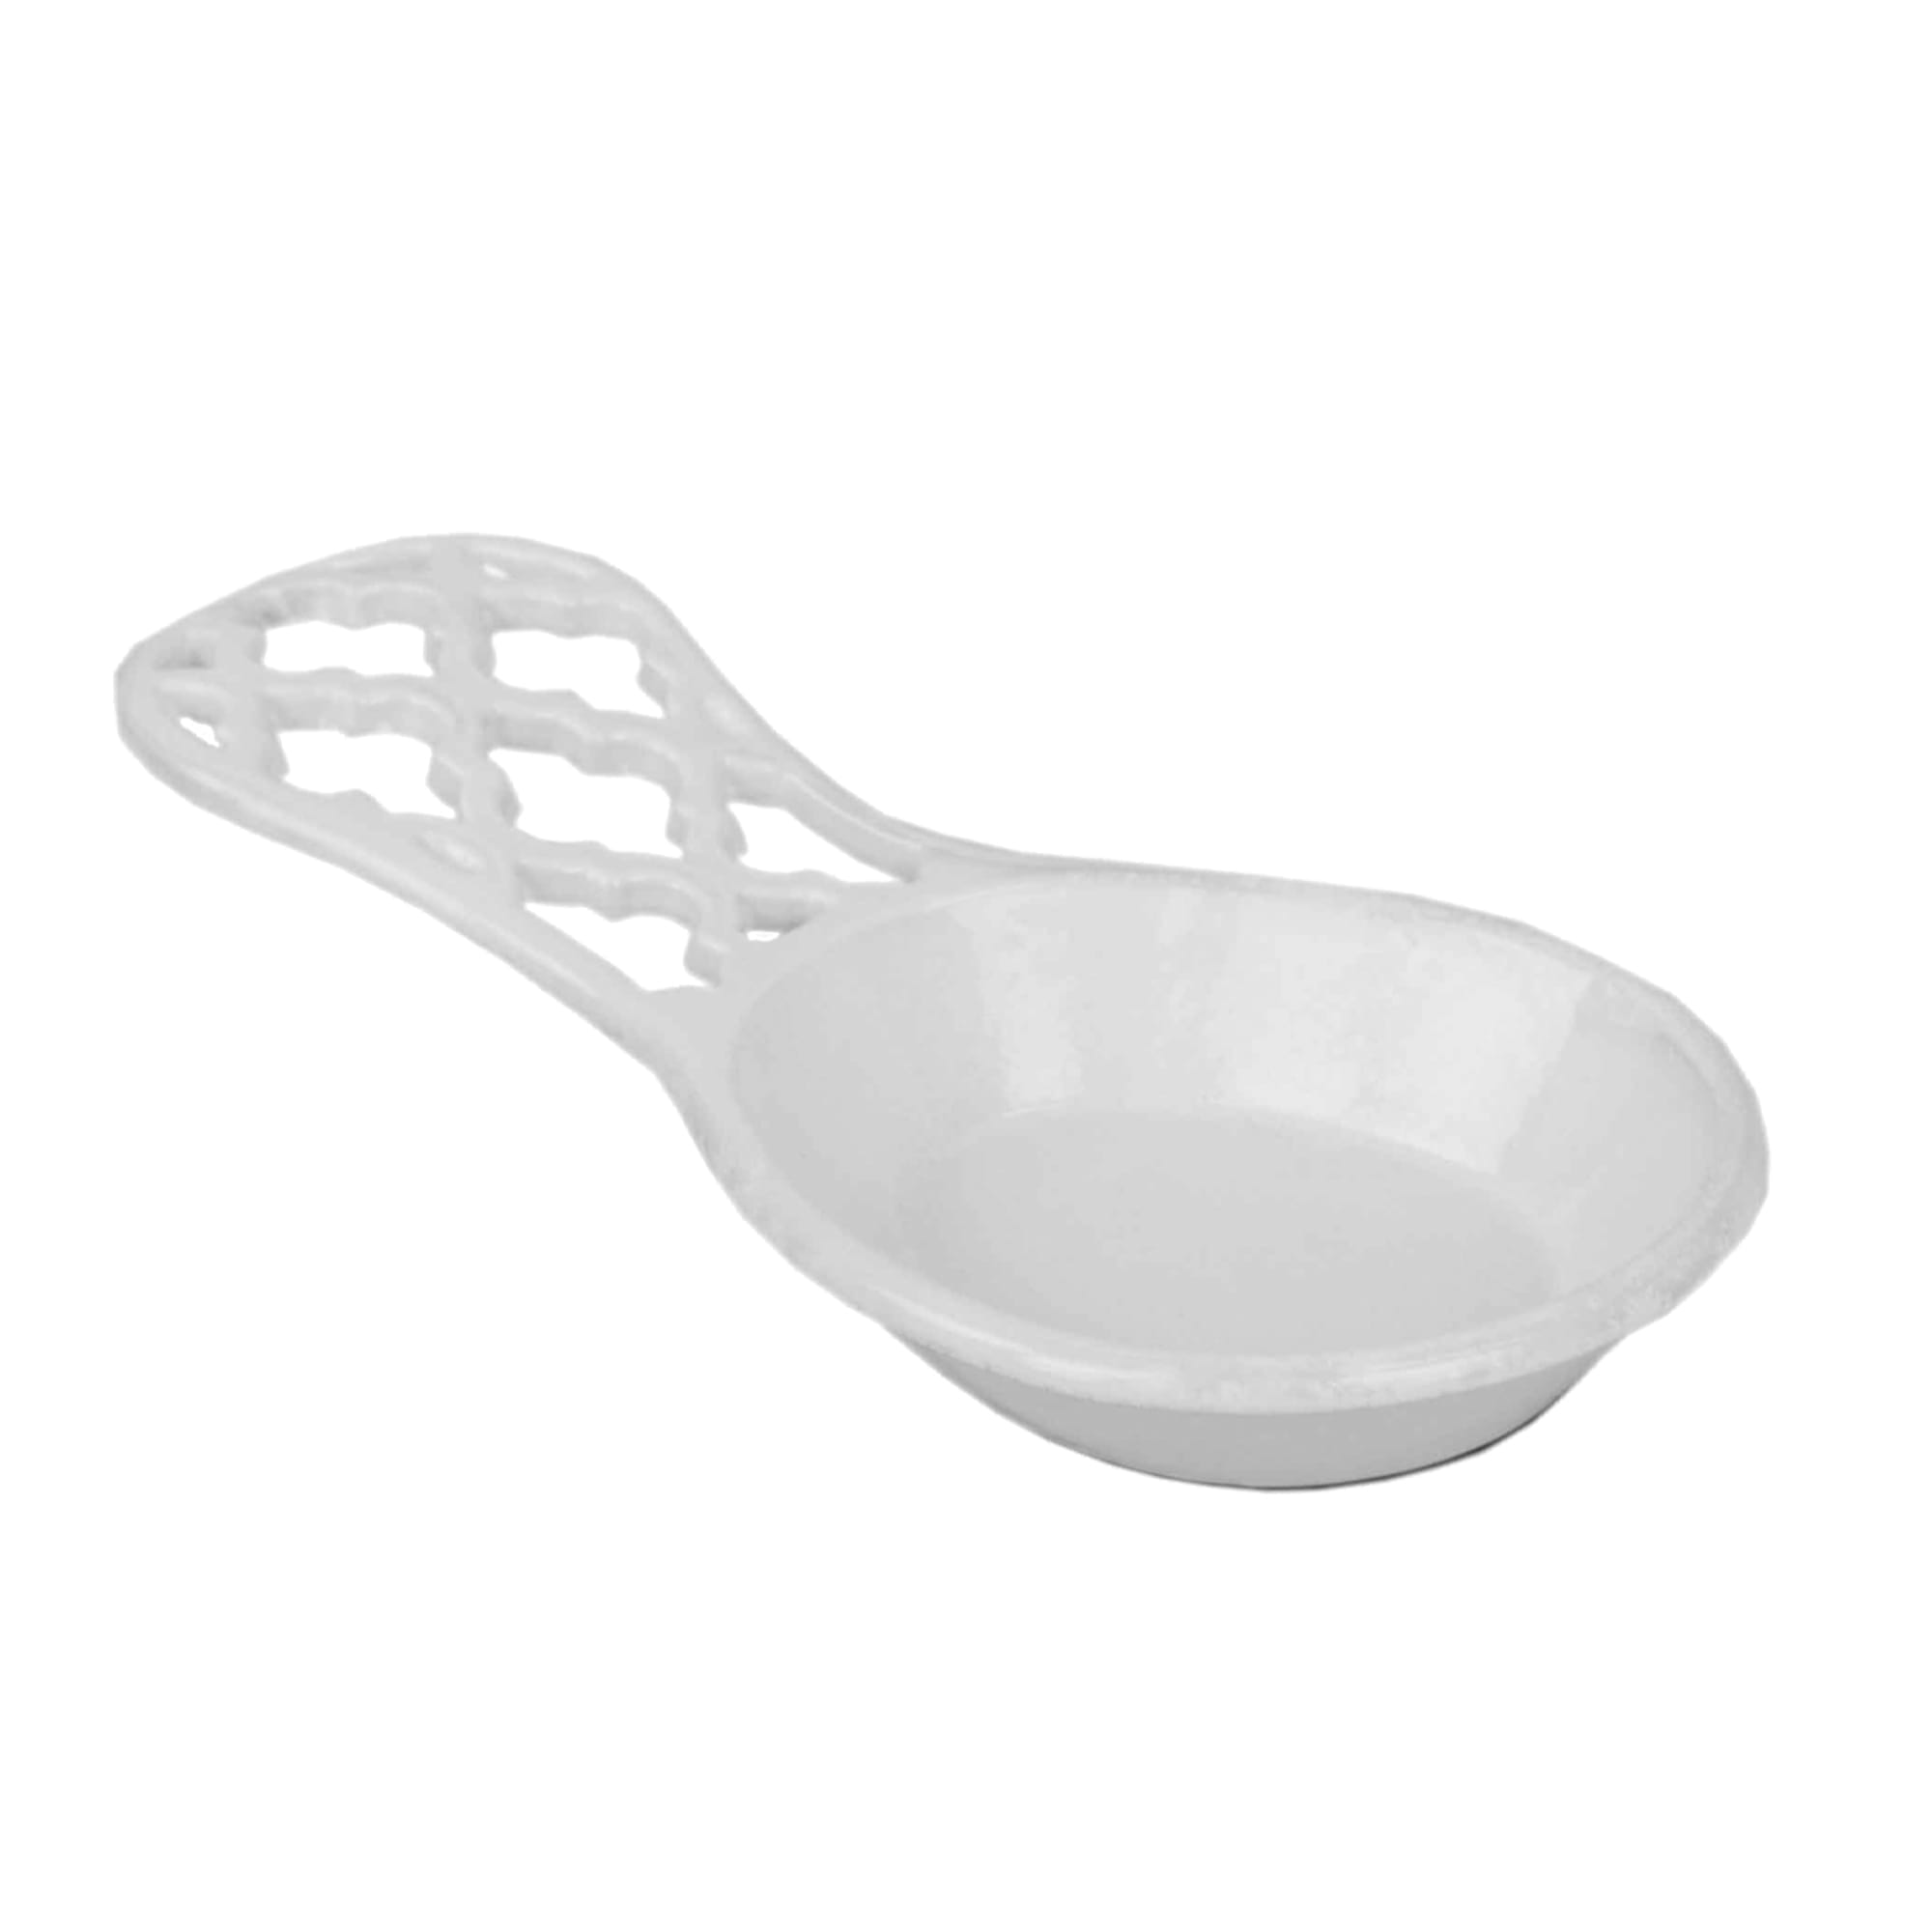 Home Basics Lattice Collection Cast Iron Spoon Rest, White $4.00 EACH, CASE PACK OF 6